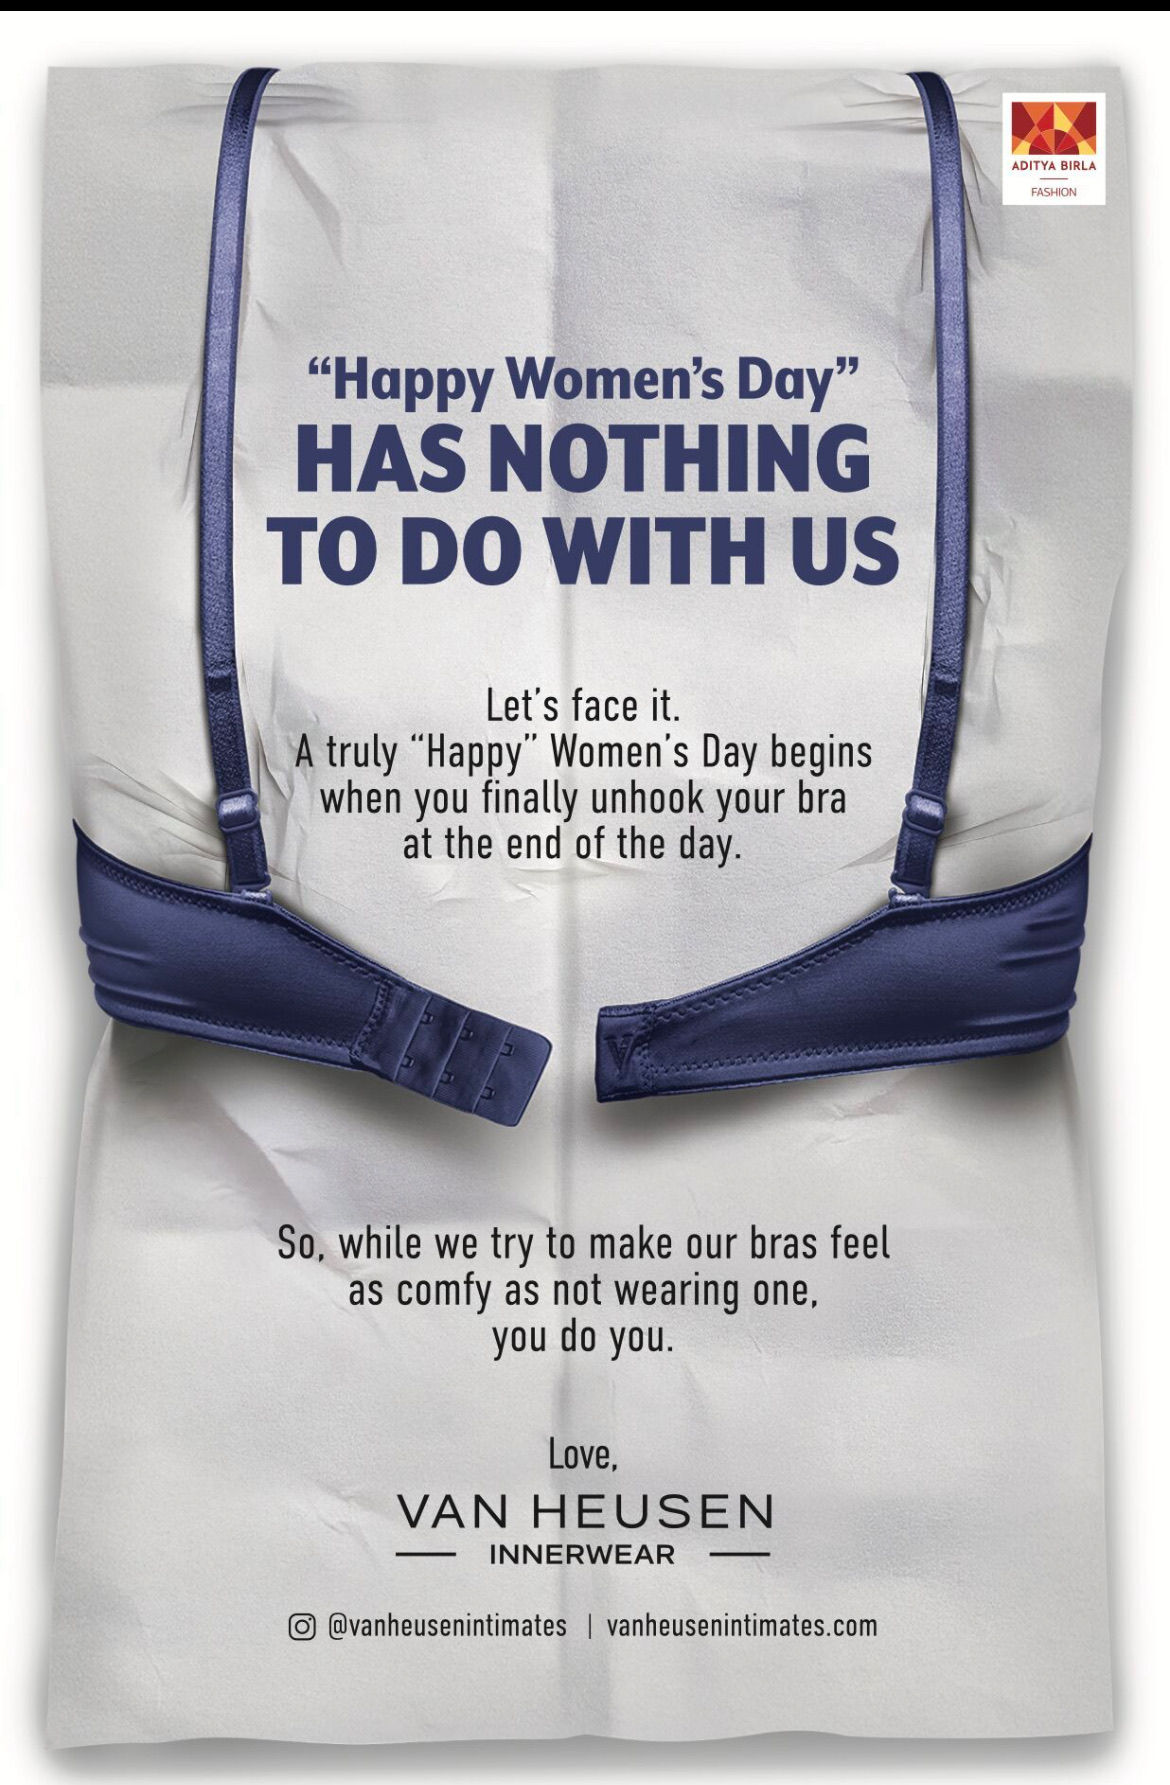 Love how Van Heusen openly acknowledges women are happier without the bras (their products basically) in their women’s day ad. What do you Chudails think? Like it or love this 🖤